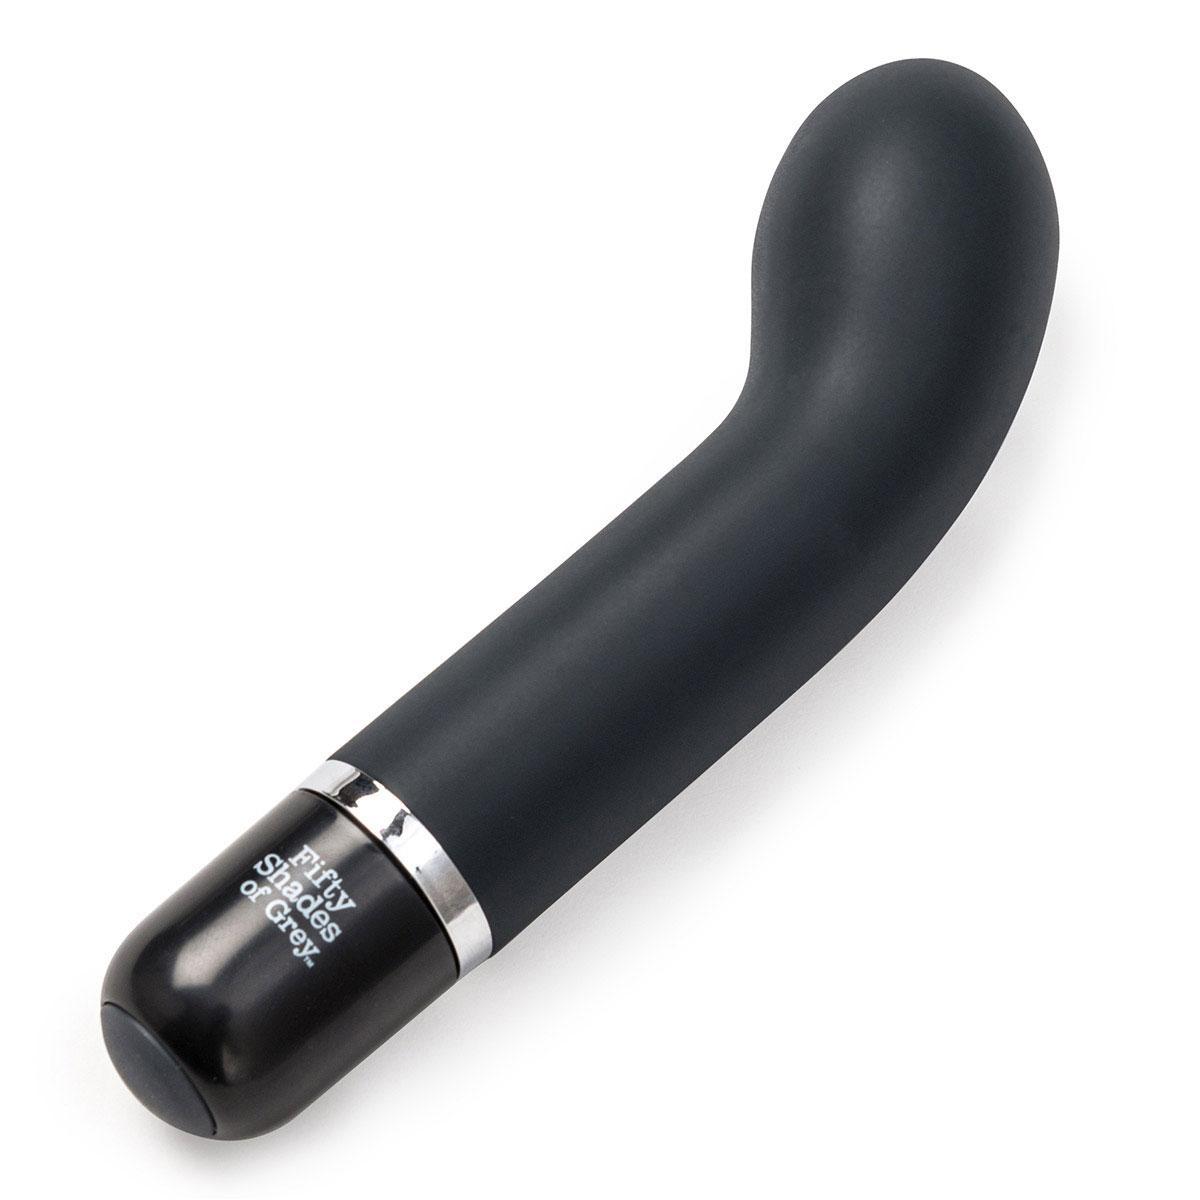 Fifty Shades Insatiable Desire Mini G-spot Vibrator - Buy At Luxury Toy X - Free 3-Day Shipping